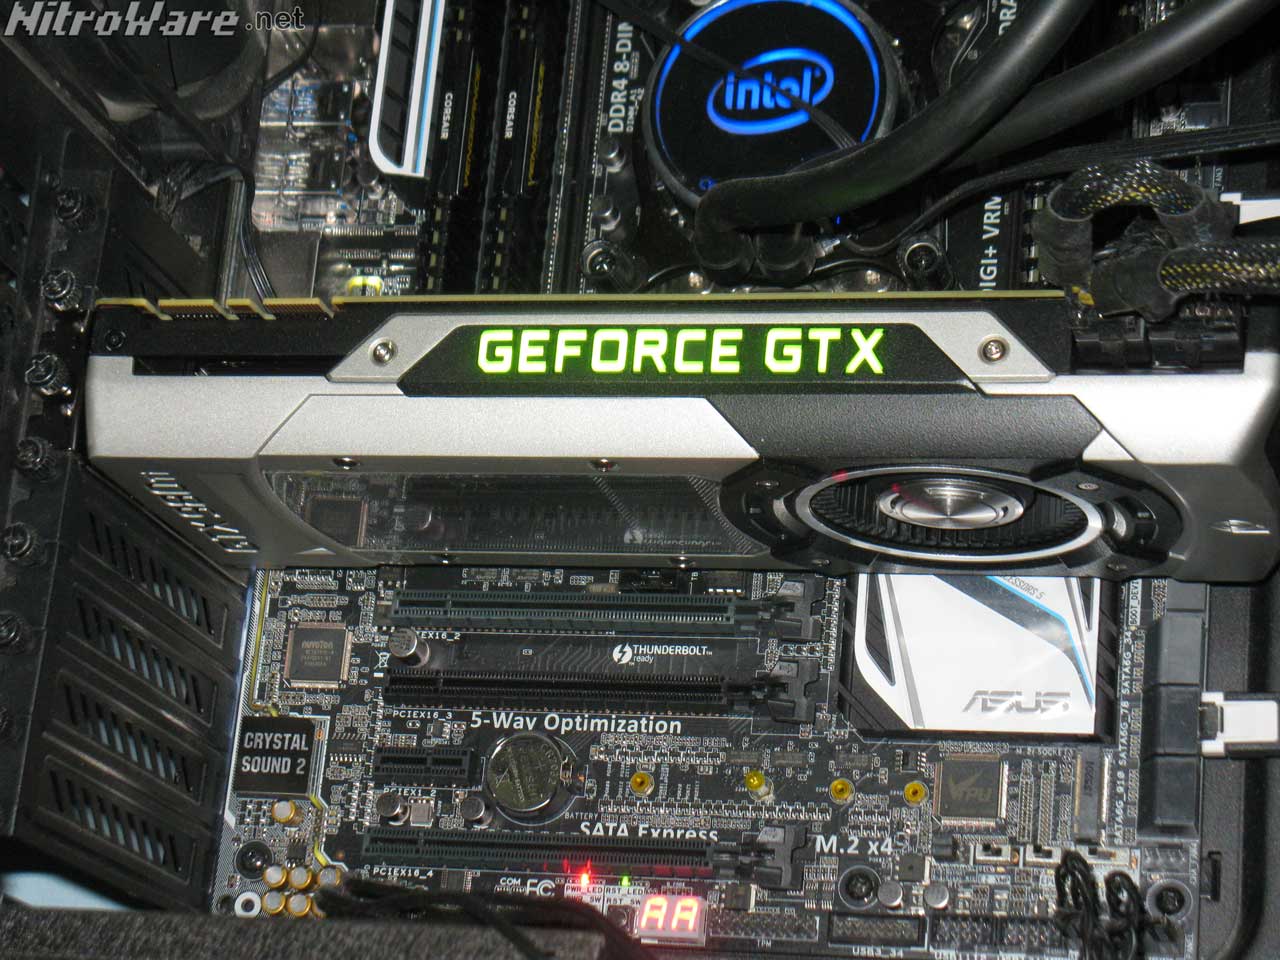 NVIDIA GEFORCE GTX 980 Ti in ASUS X99-A/USB 3.1 Motherboard